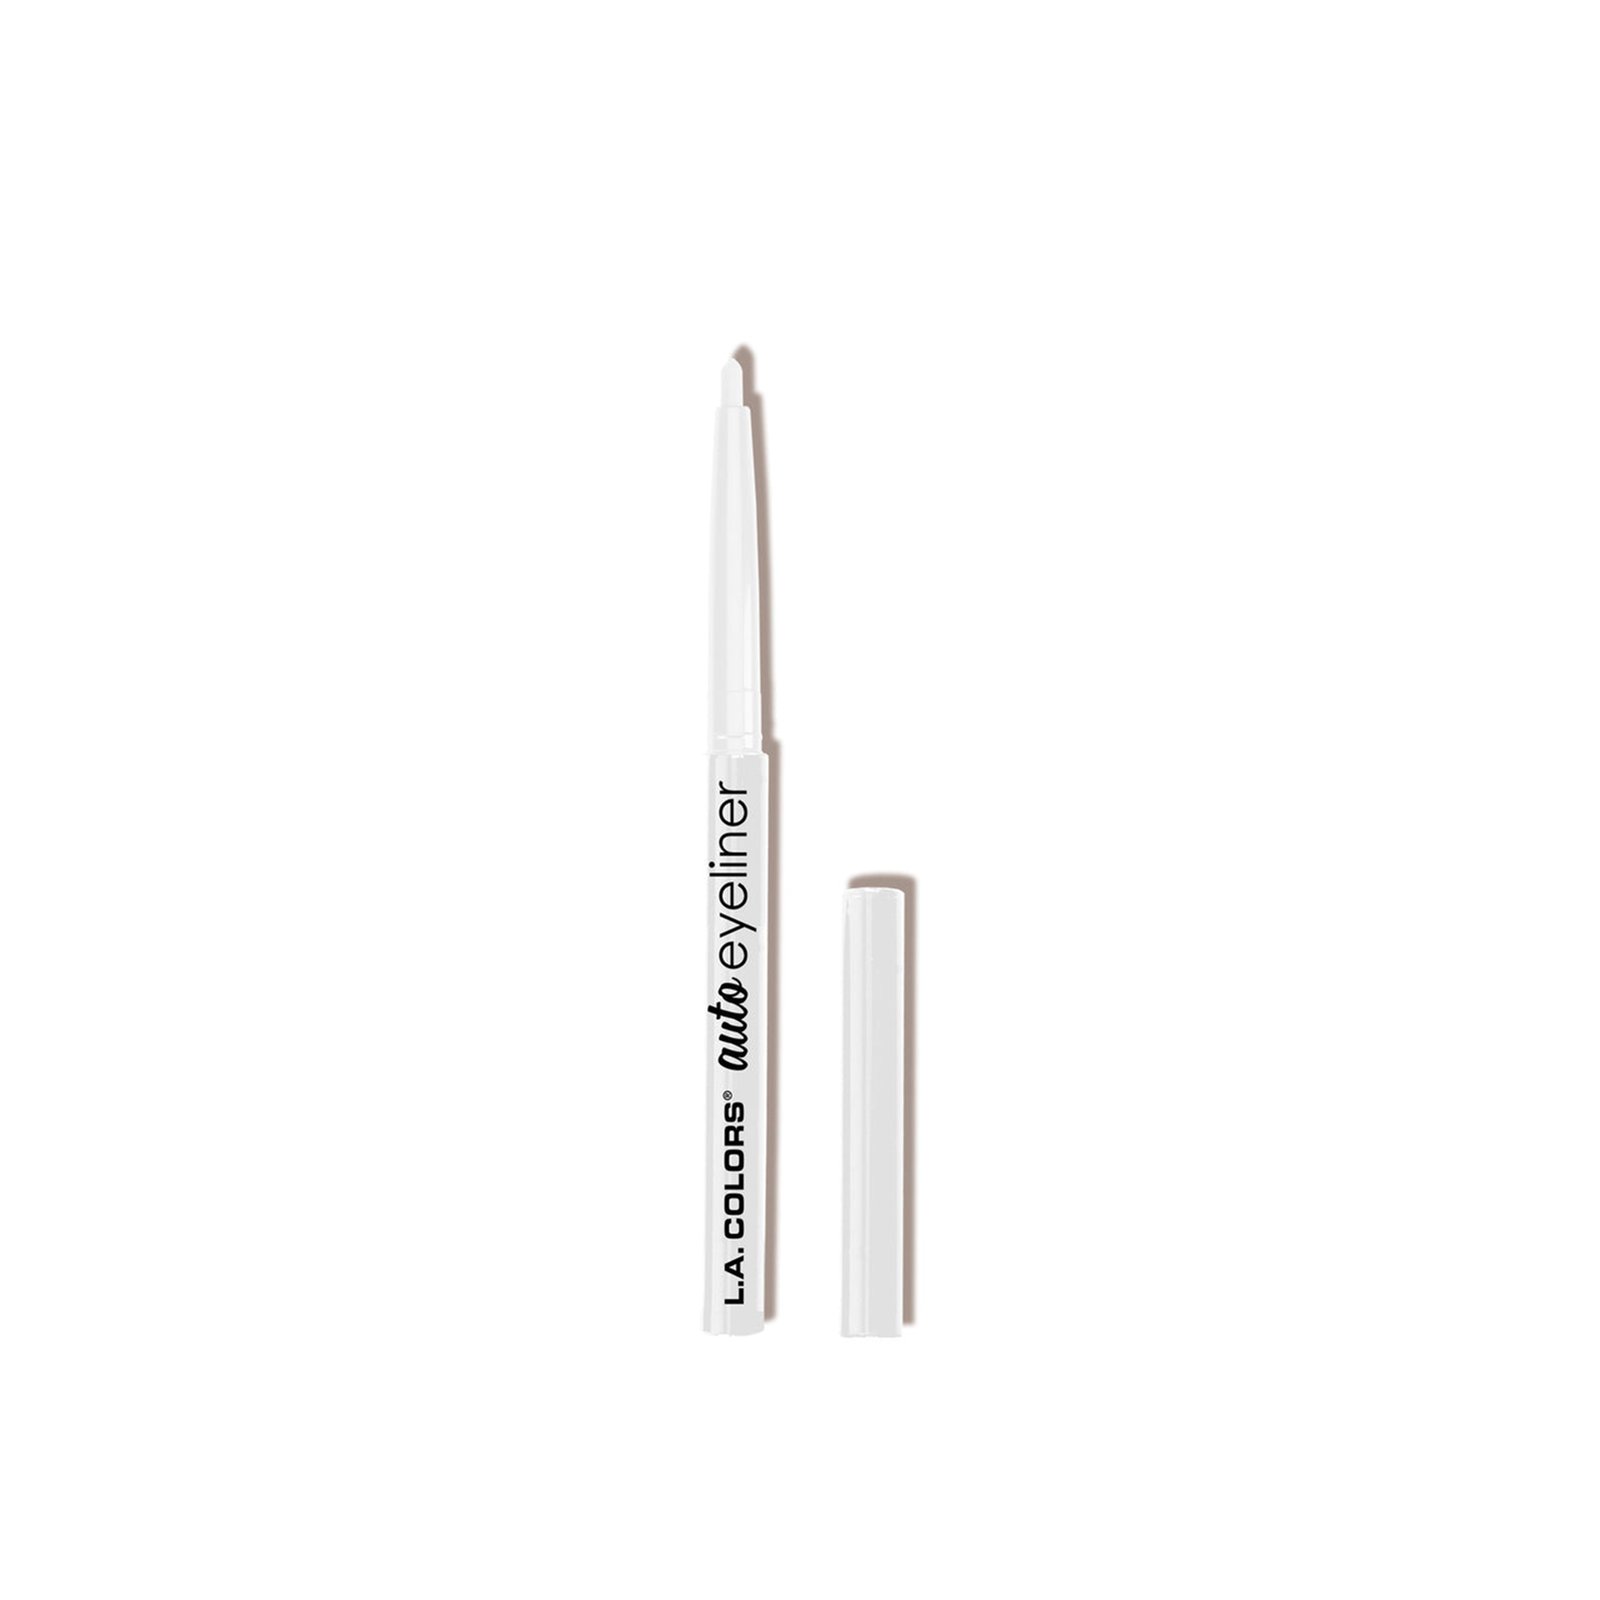 L.A. Colors Auto Eyeliner CAE665A White 0.3g (0.01 oz)